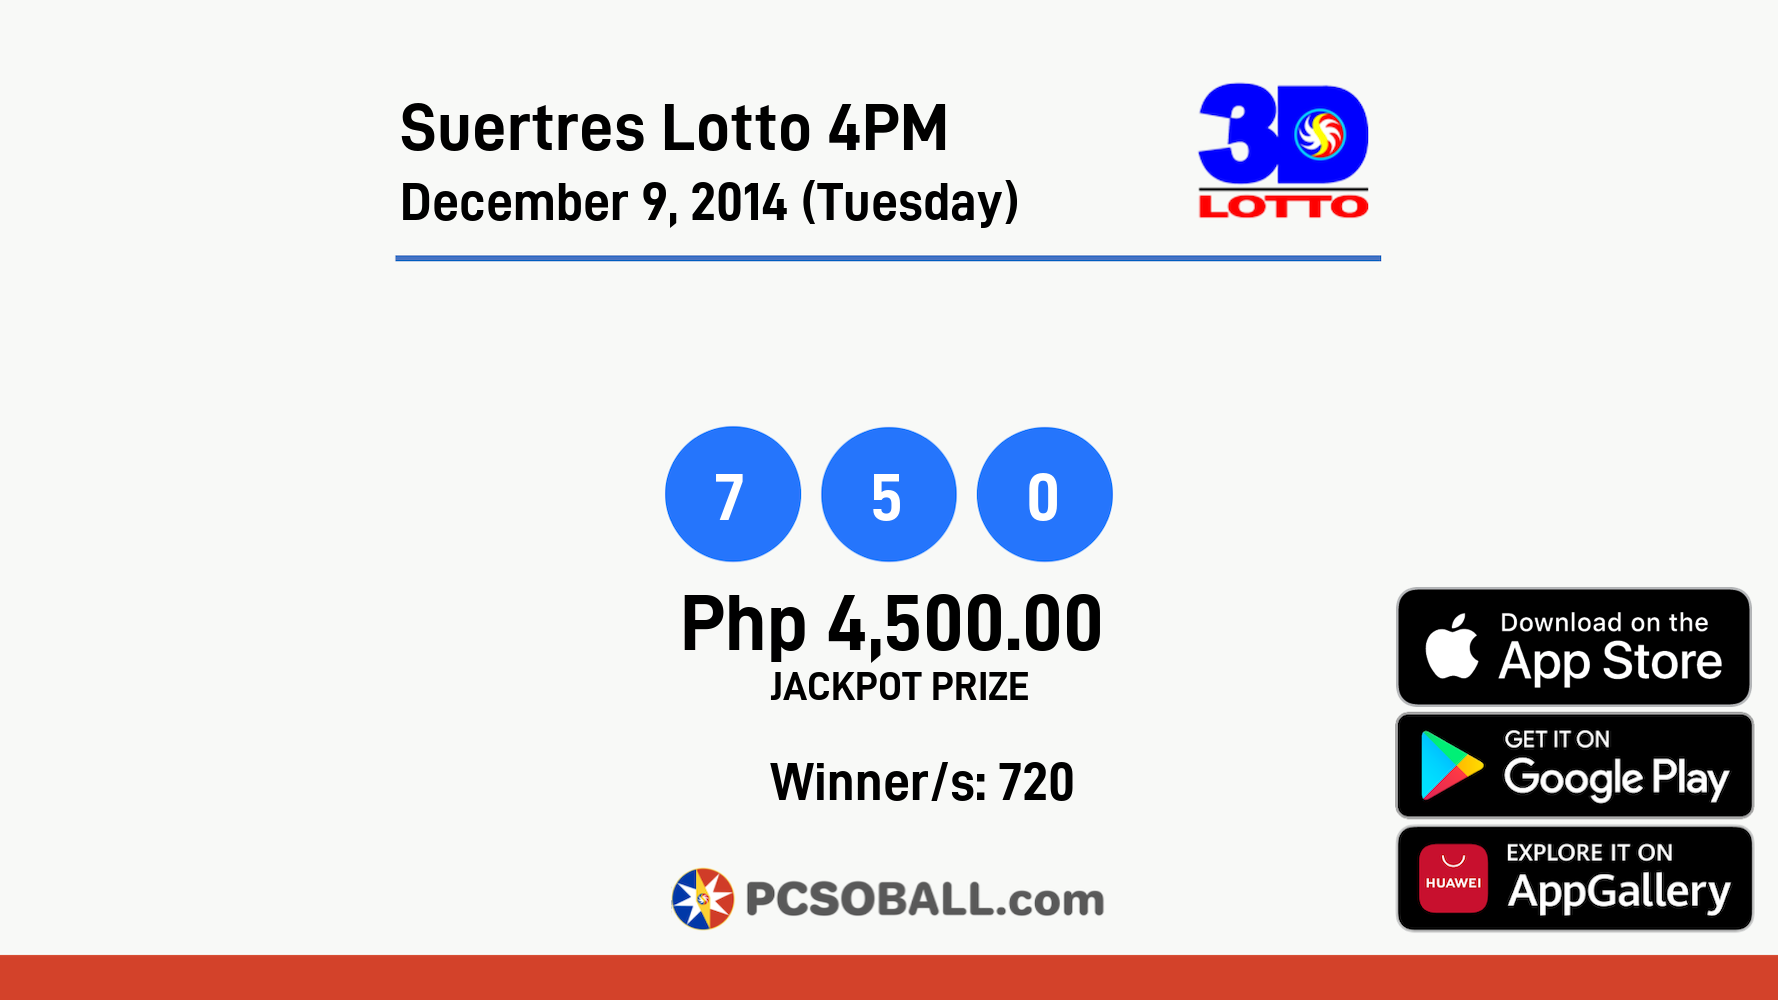 Suertres Lotto 4PM December 9, 2014 (Tuesday) Result